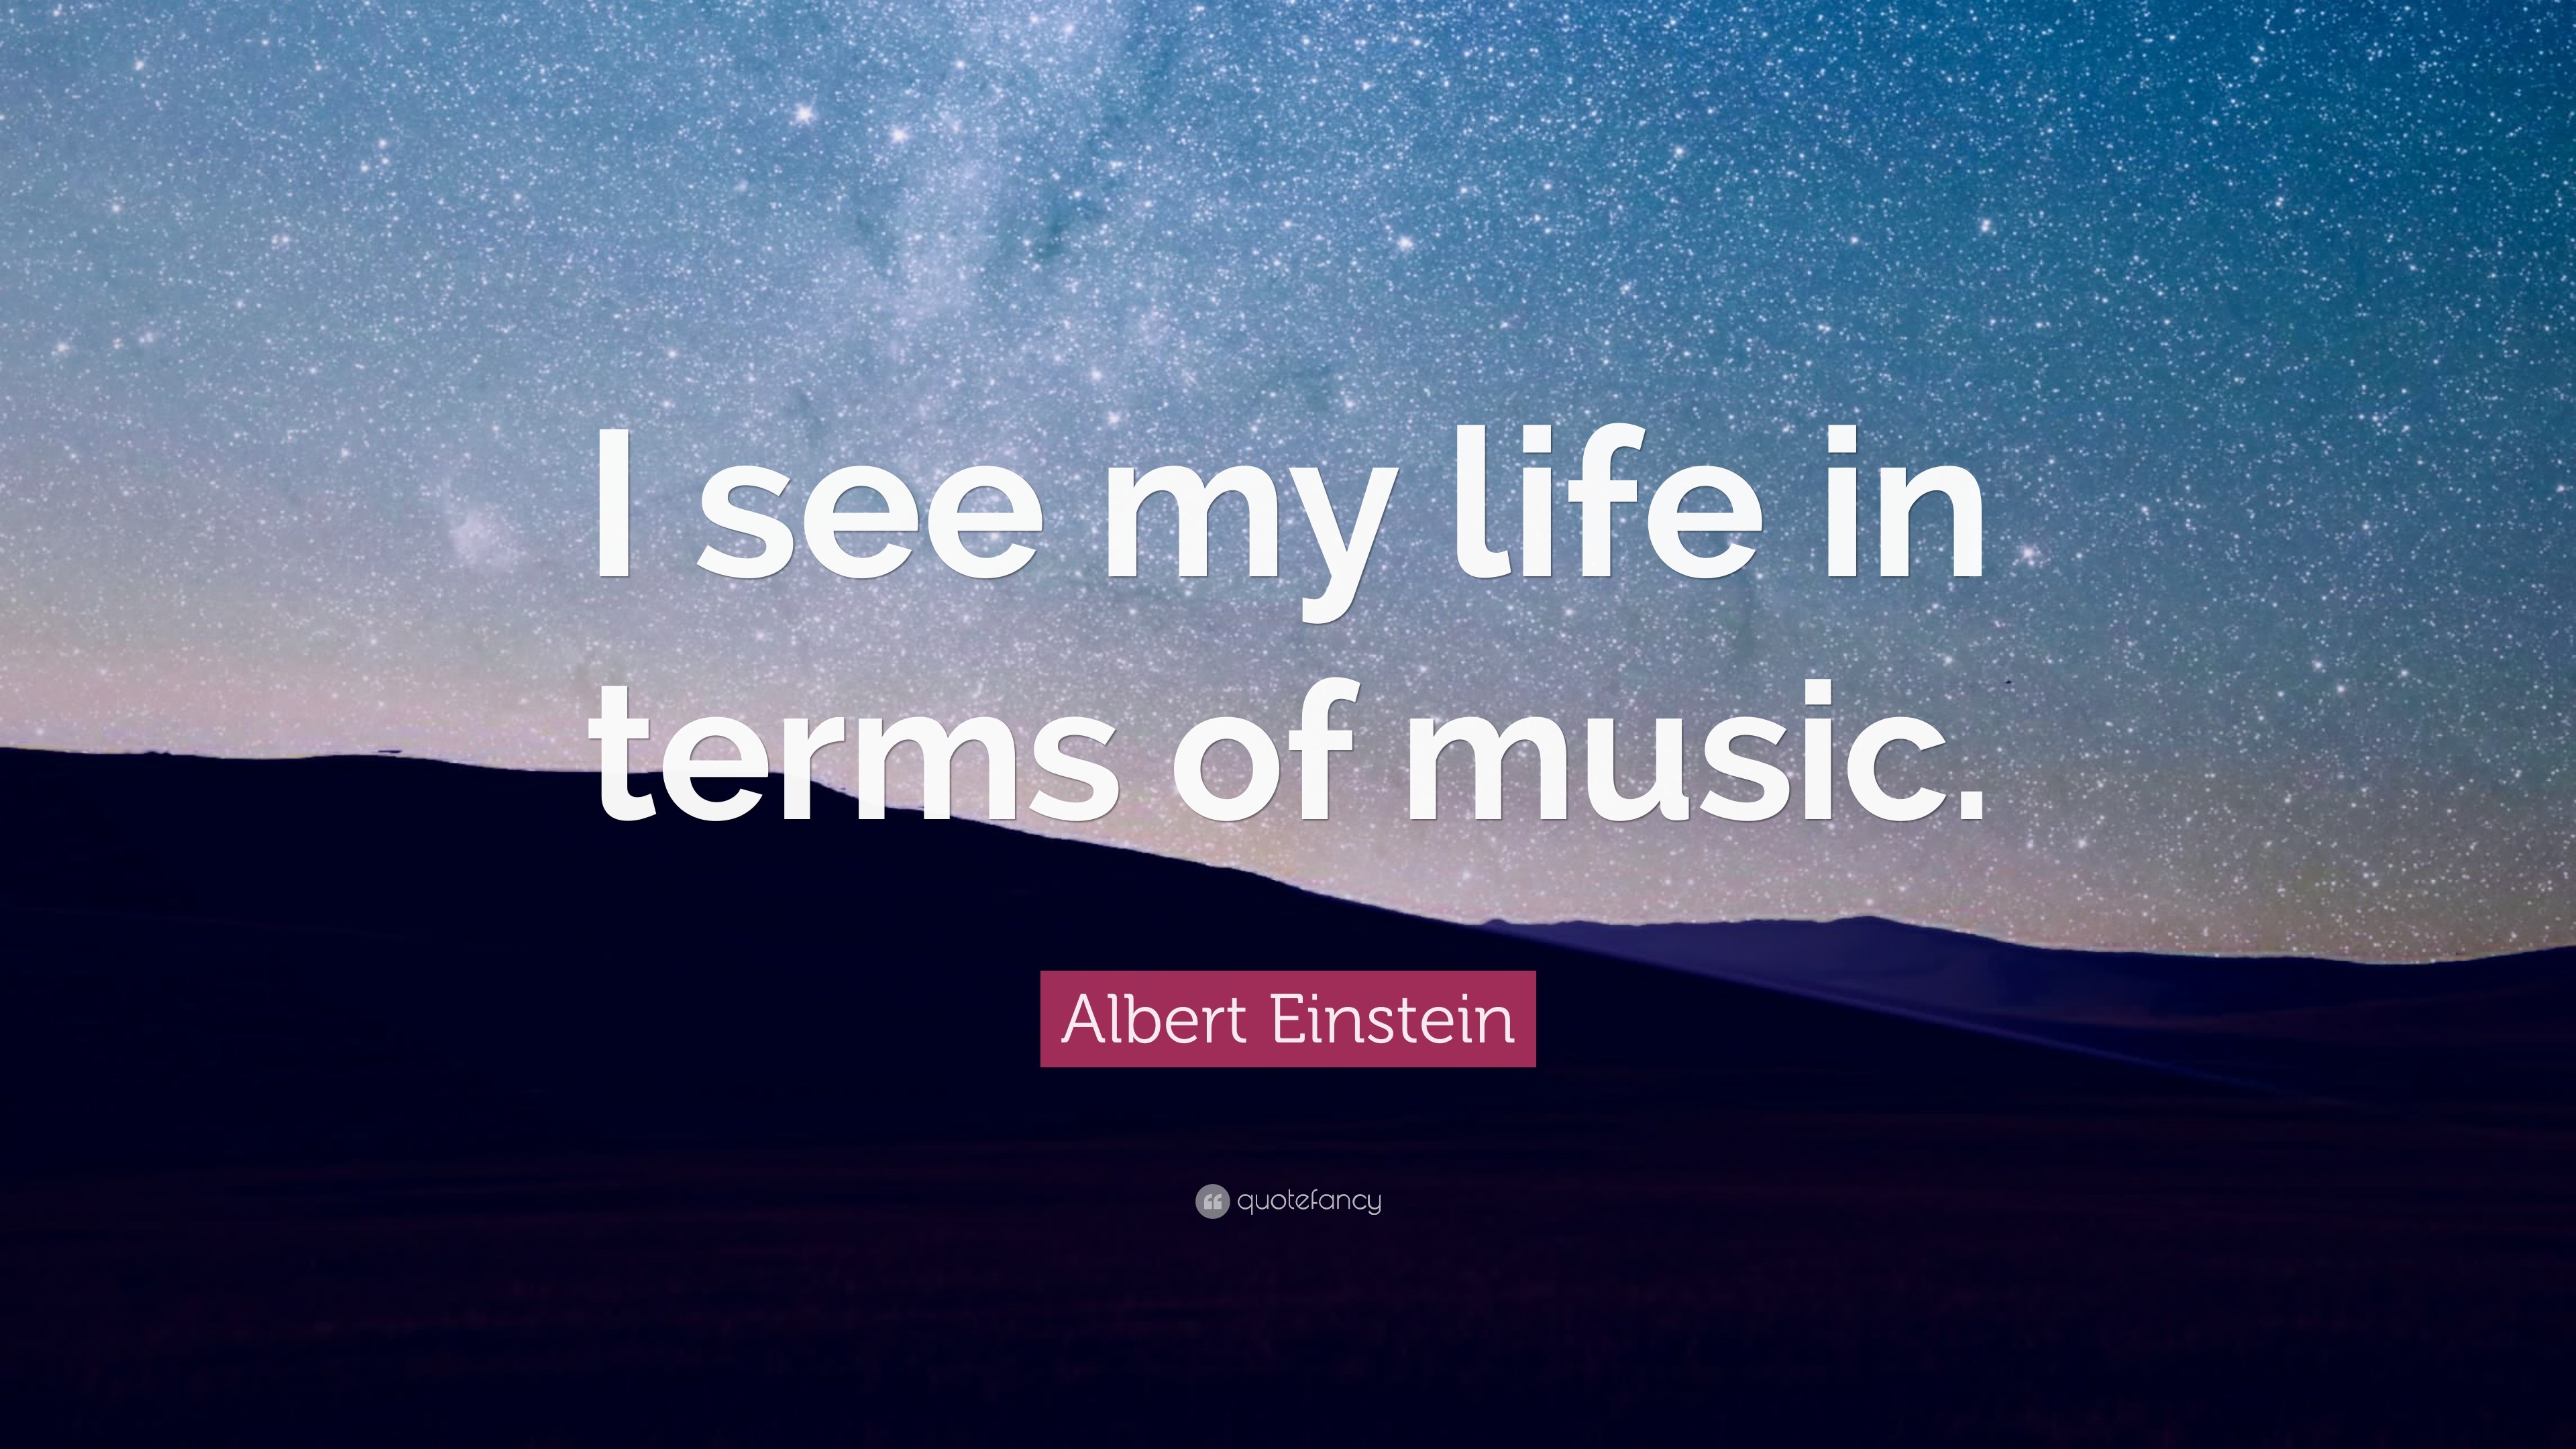 Albert Einstein Quote “I see my life in terms of music ”